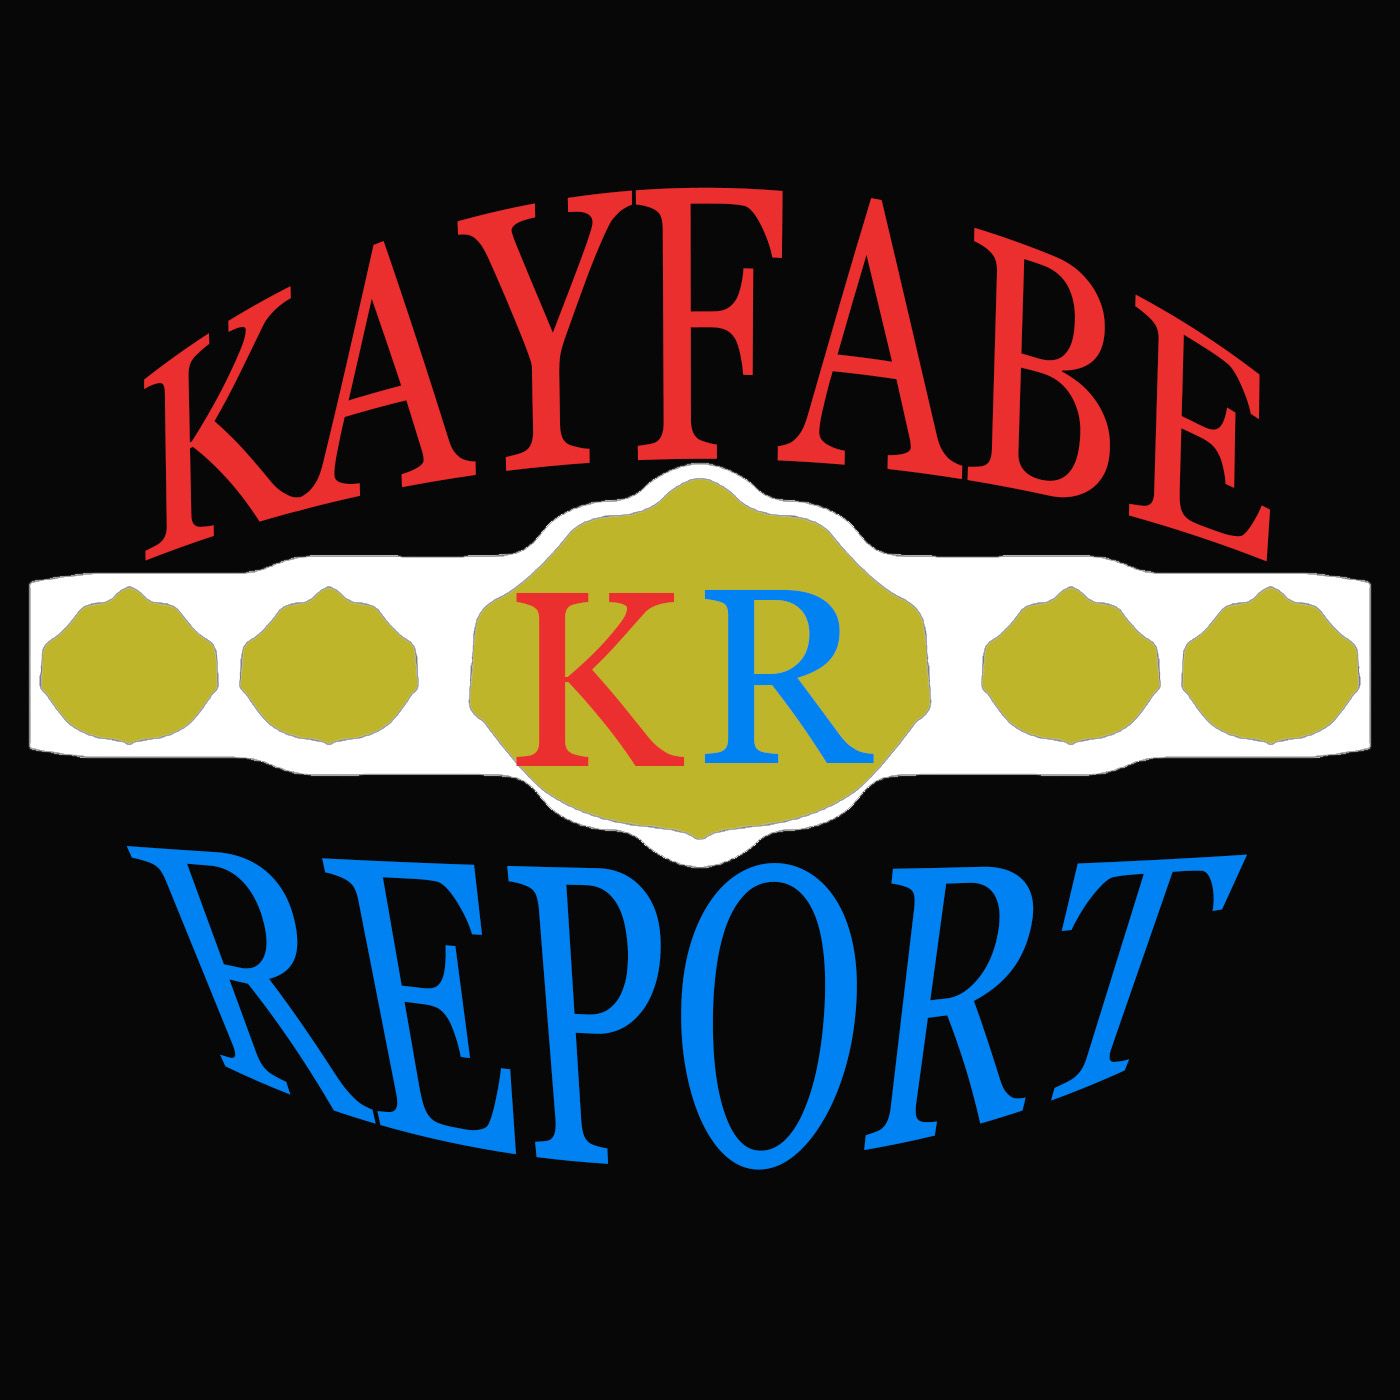 kayfabe report #37 wrestlemania preview